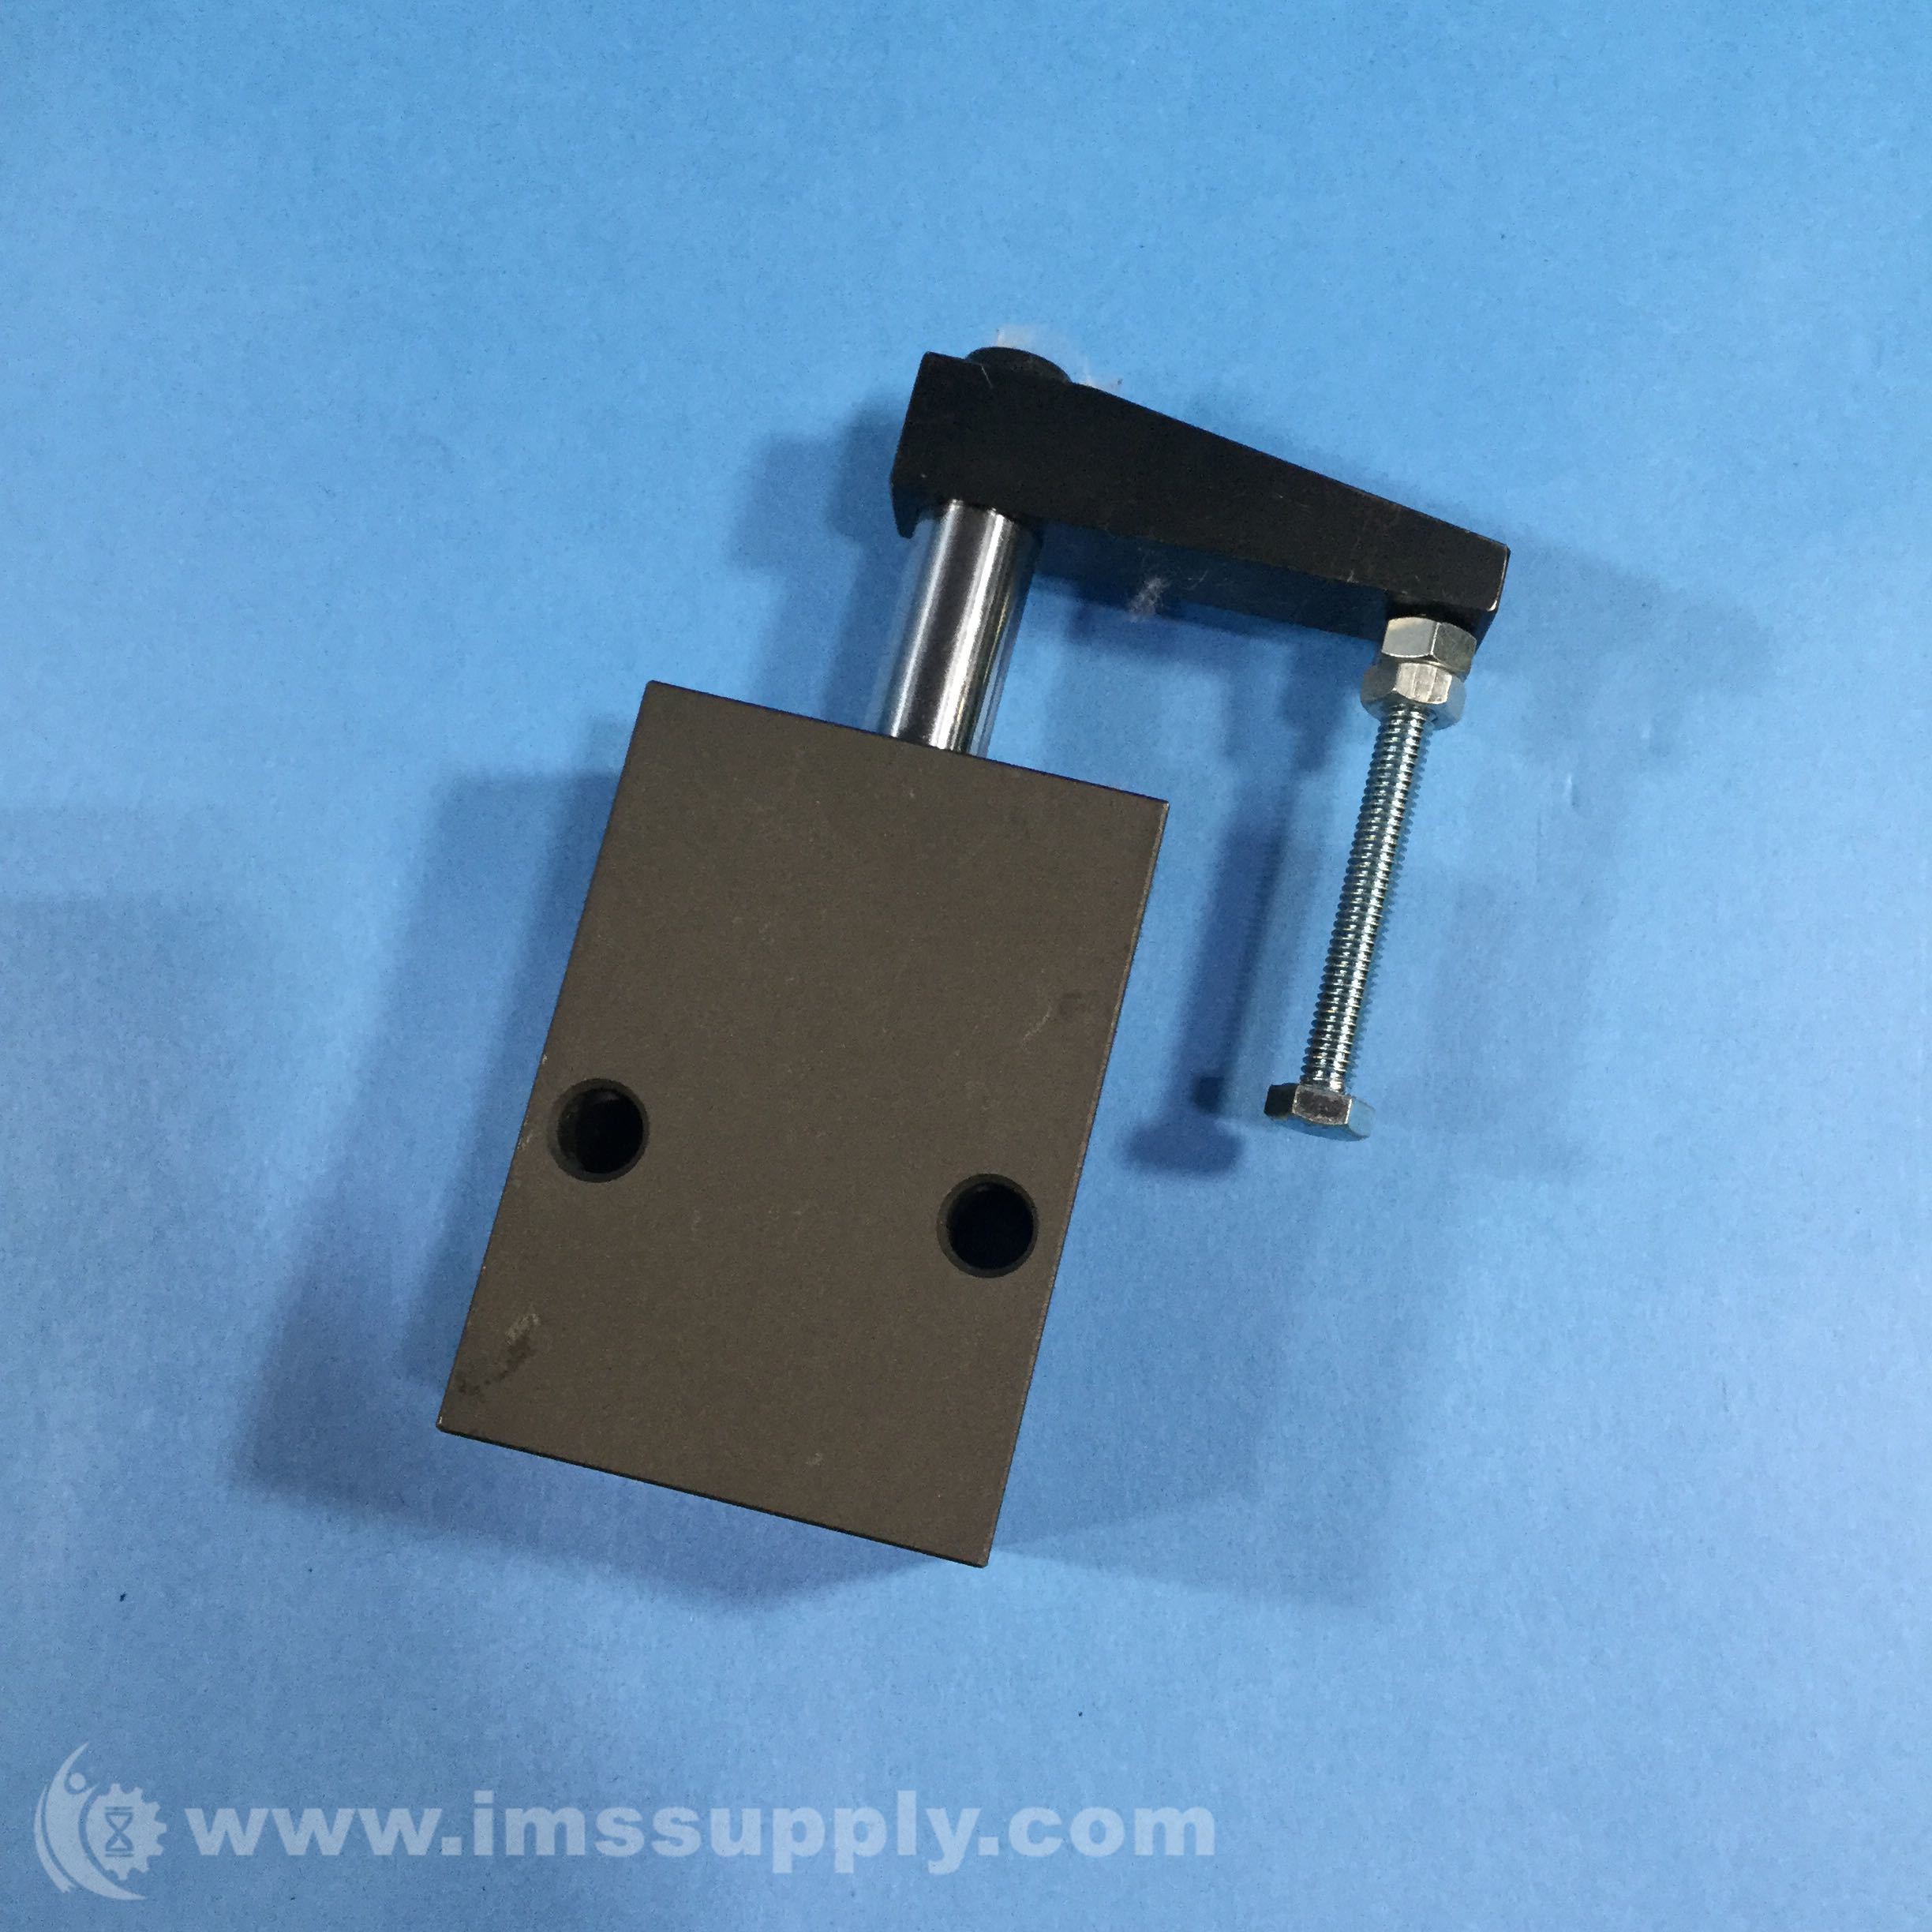 90 Degree USIP Details about   Phd Inc PAS2L-1-AS Swing Arm Clamp 